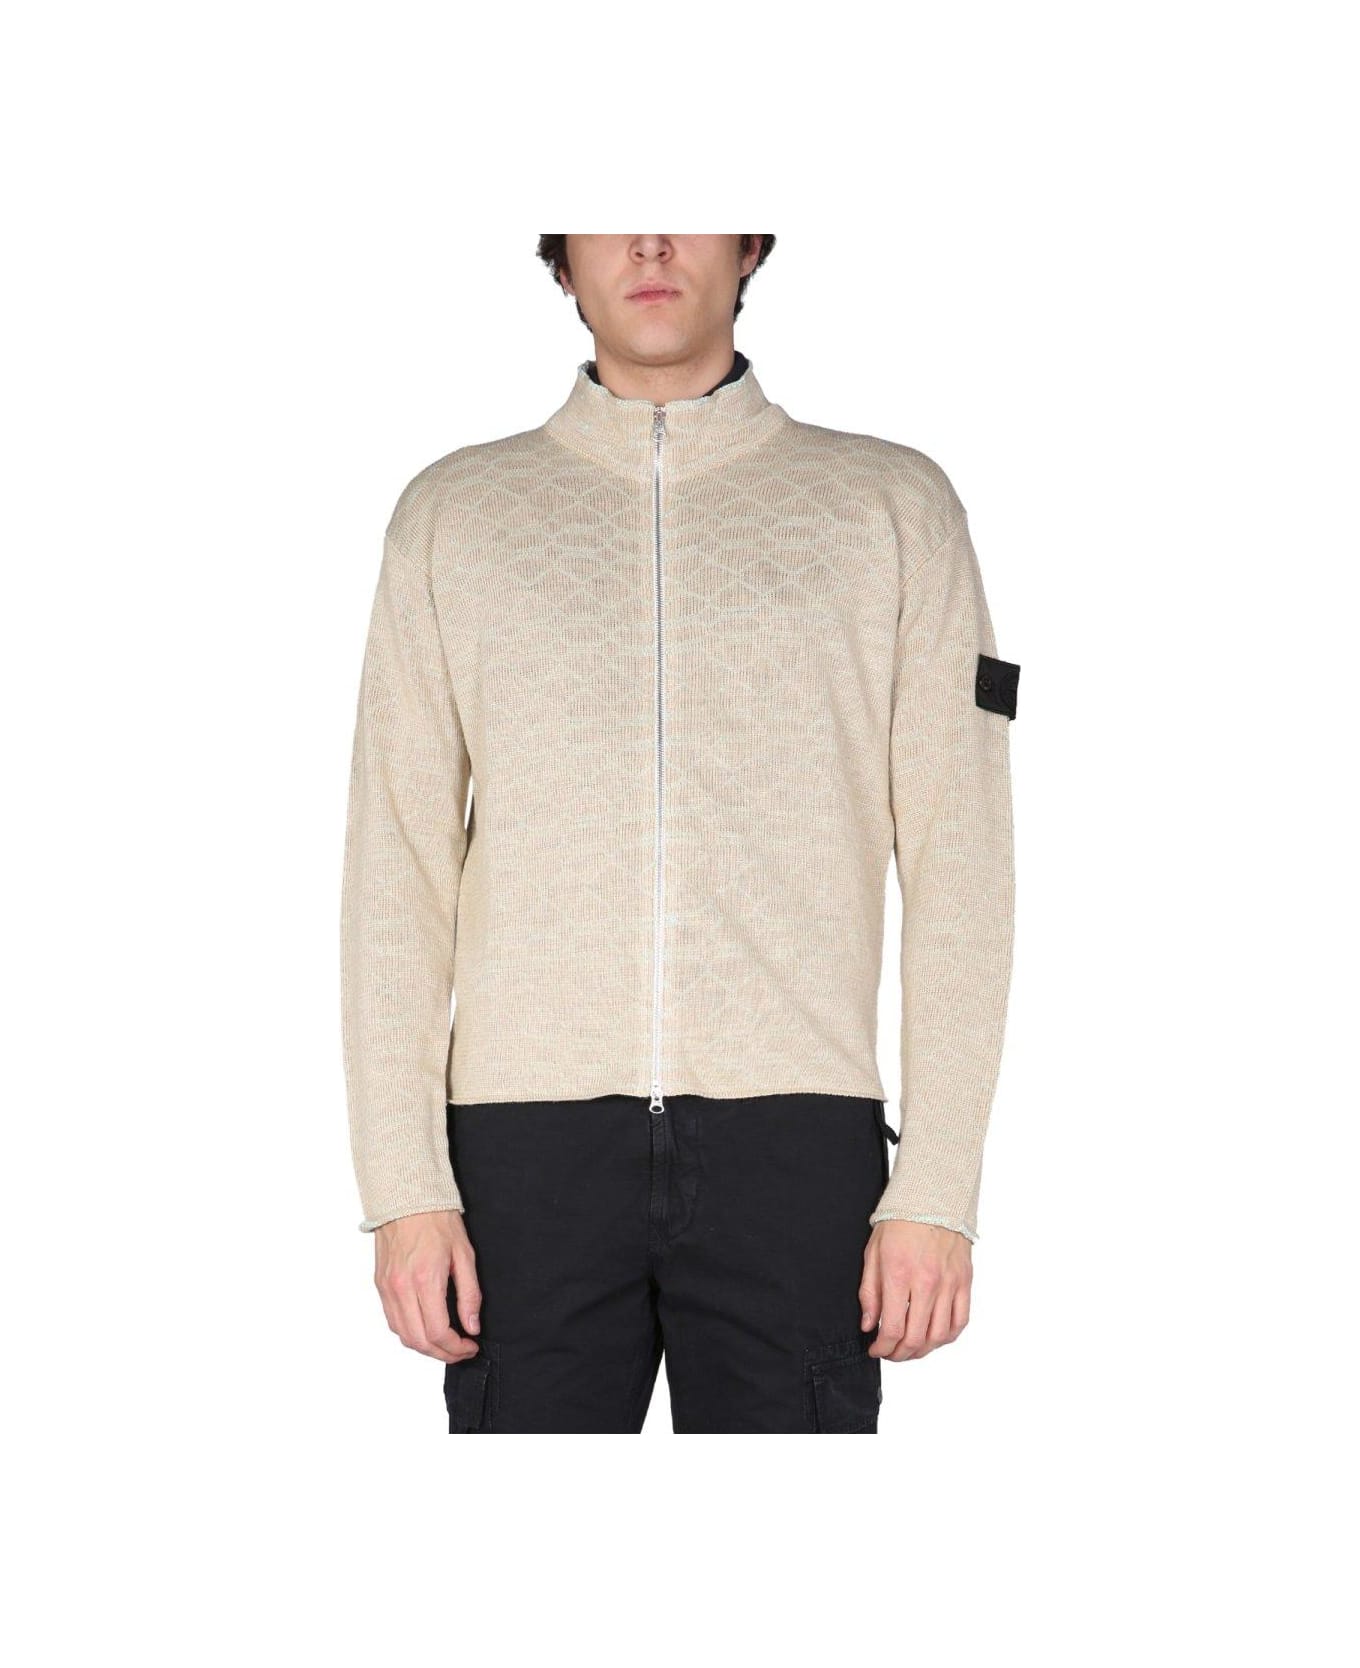 Stone Island Shadow Project Compass Patch Zipped Jacket - BEIGE